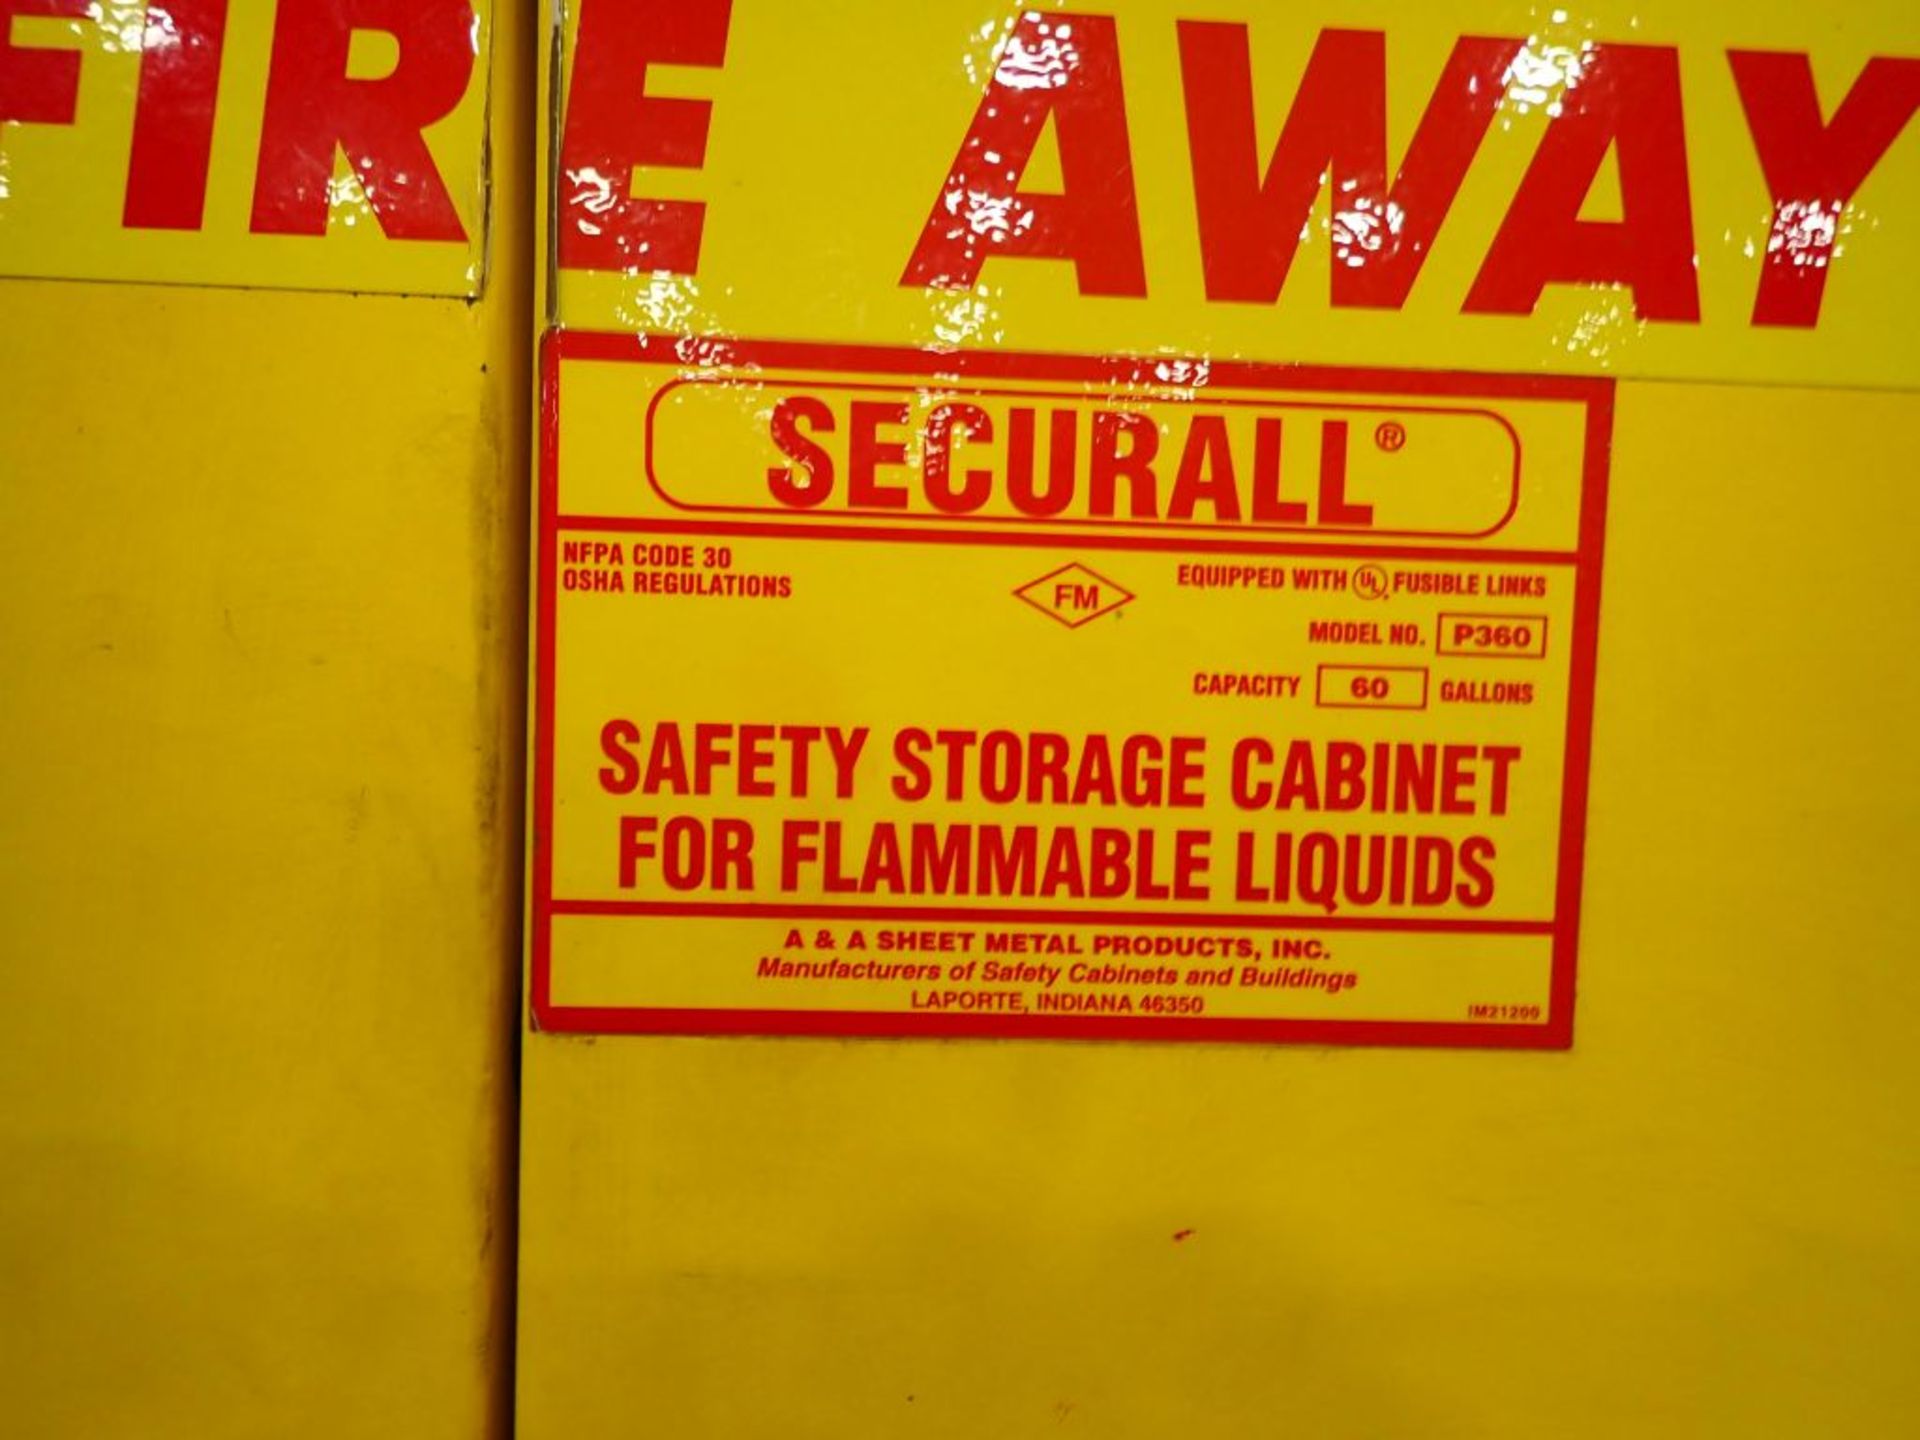 Securall 60 Gallon Flammable Storage Cabinet - Image 3 of 3